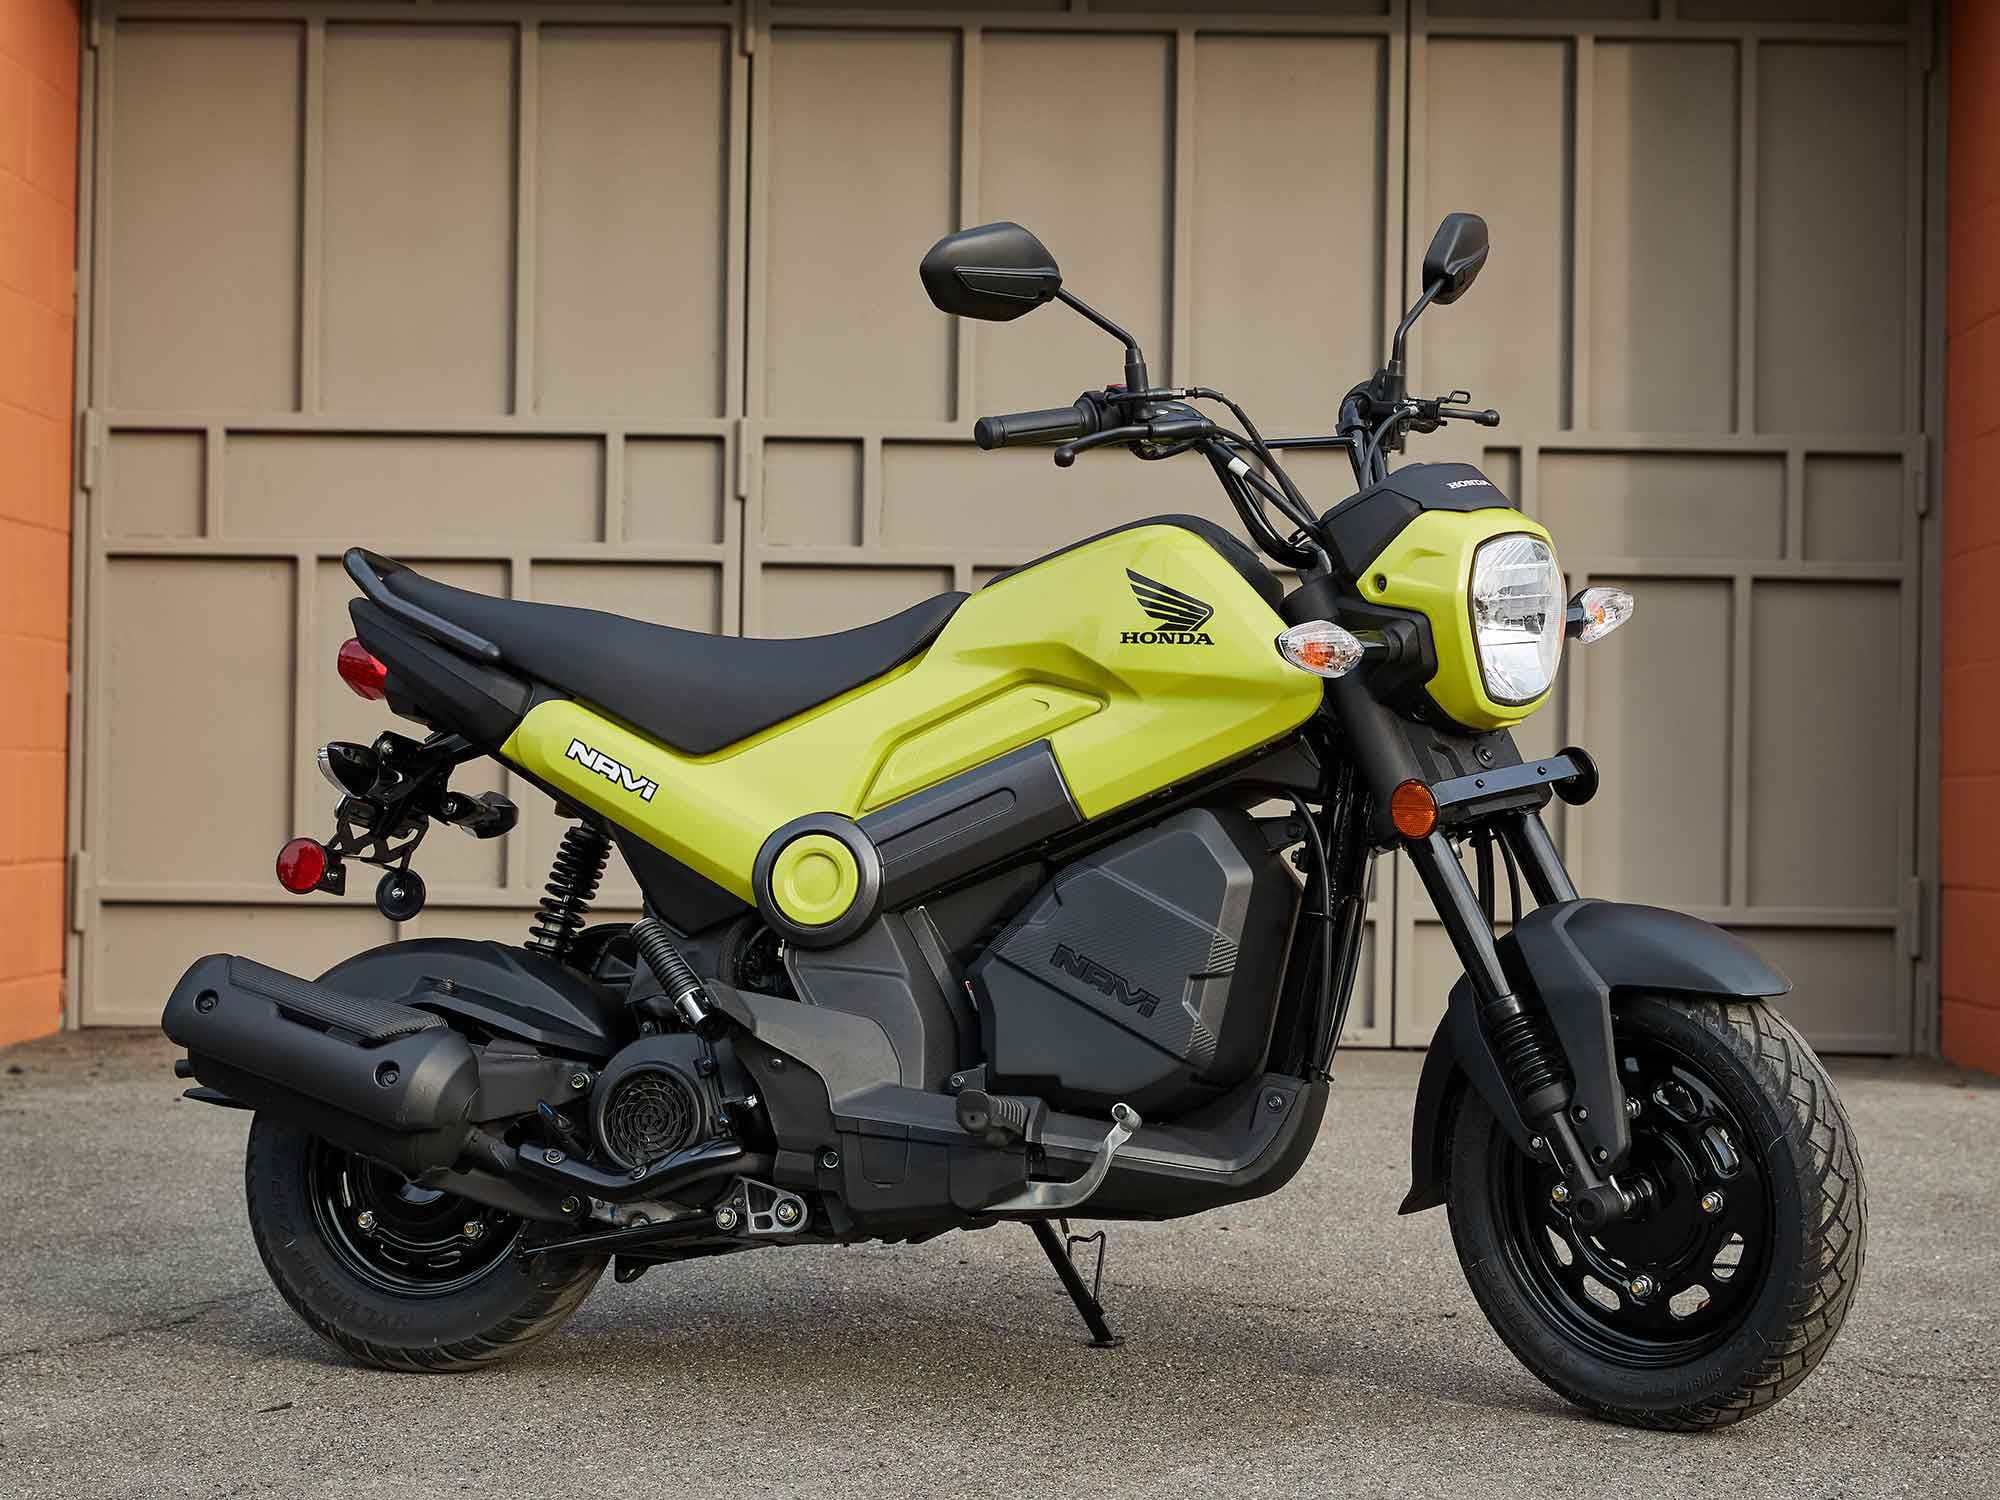 Honda’s Navi blurs the lines between scooter and motorcycle in an aim to make motorcycling more accessible than ever. That all starts with a low MSRP of just $1,807.